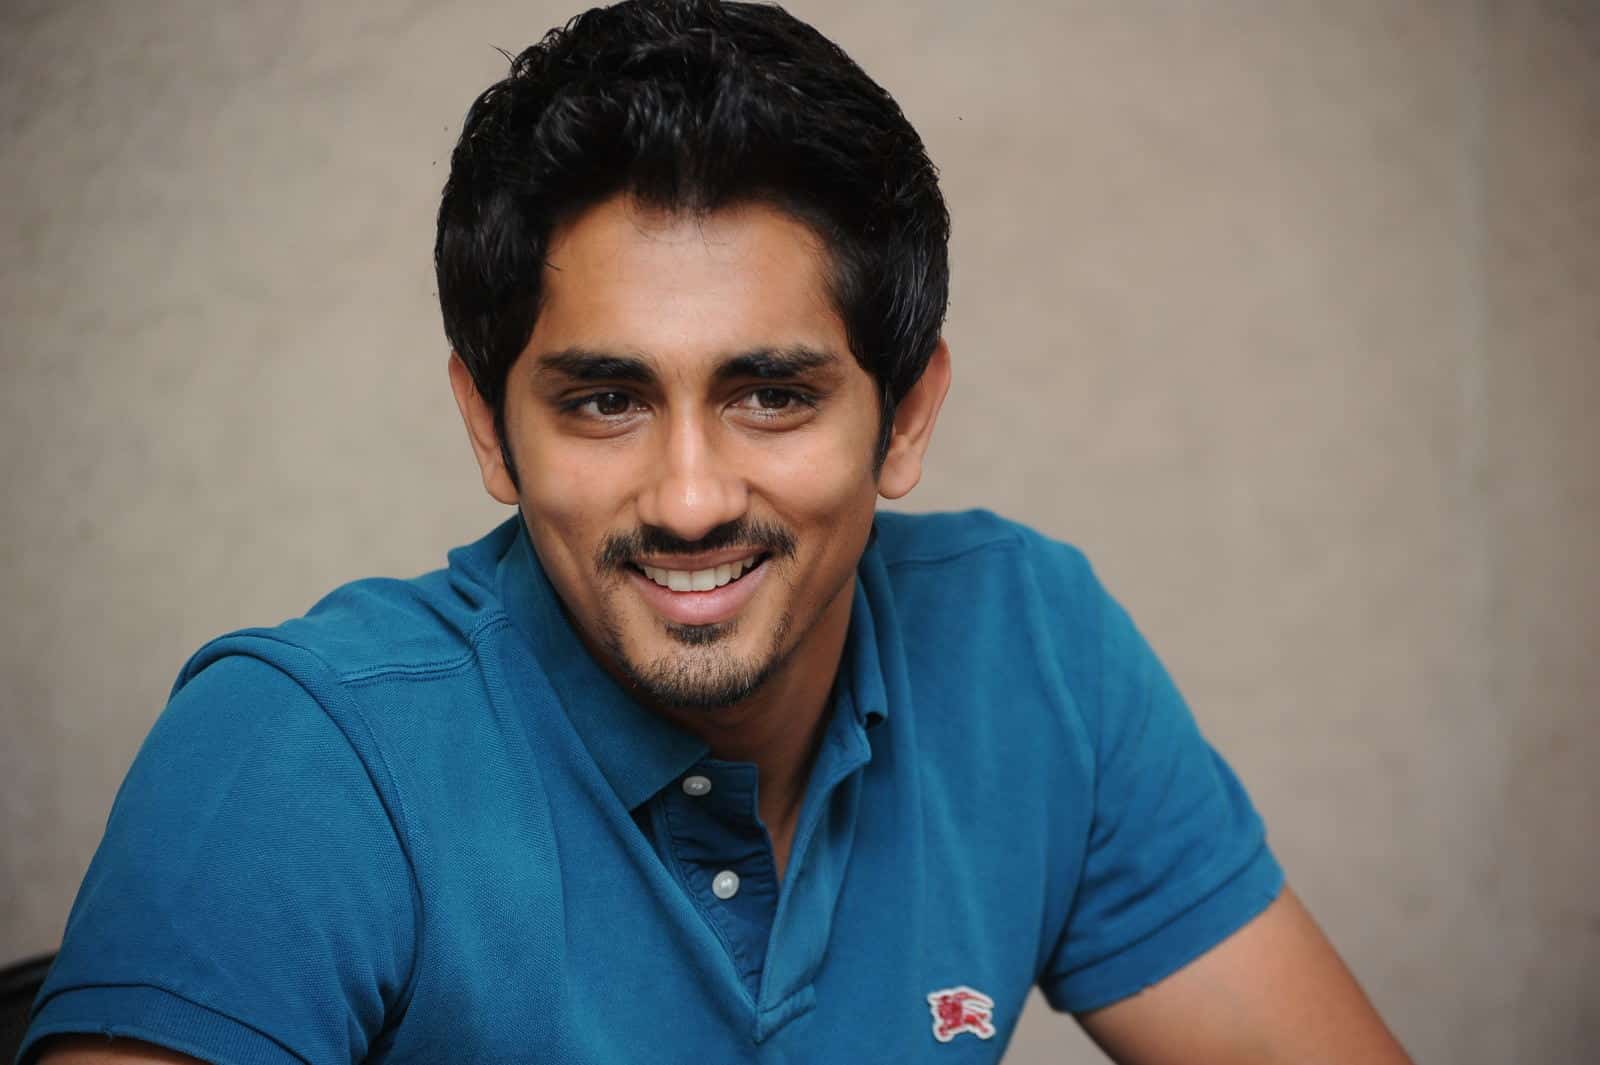 Siddharth Indian Actor Biography Height Life Story Super Stars Bio He was born on april 17, 1979 in chennai, tamil nadu, india. siddharth indian actor biography